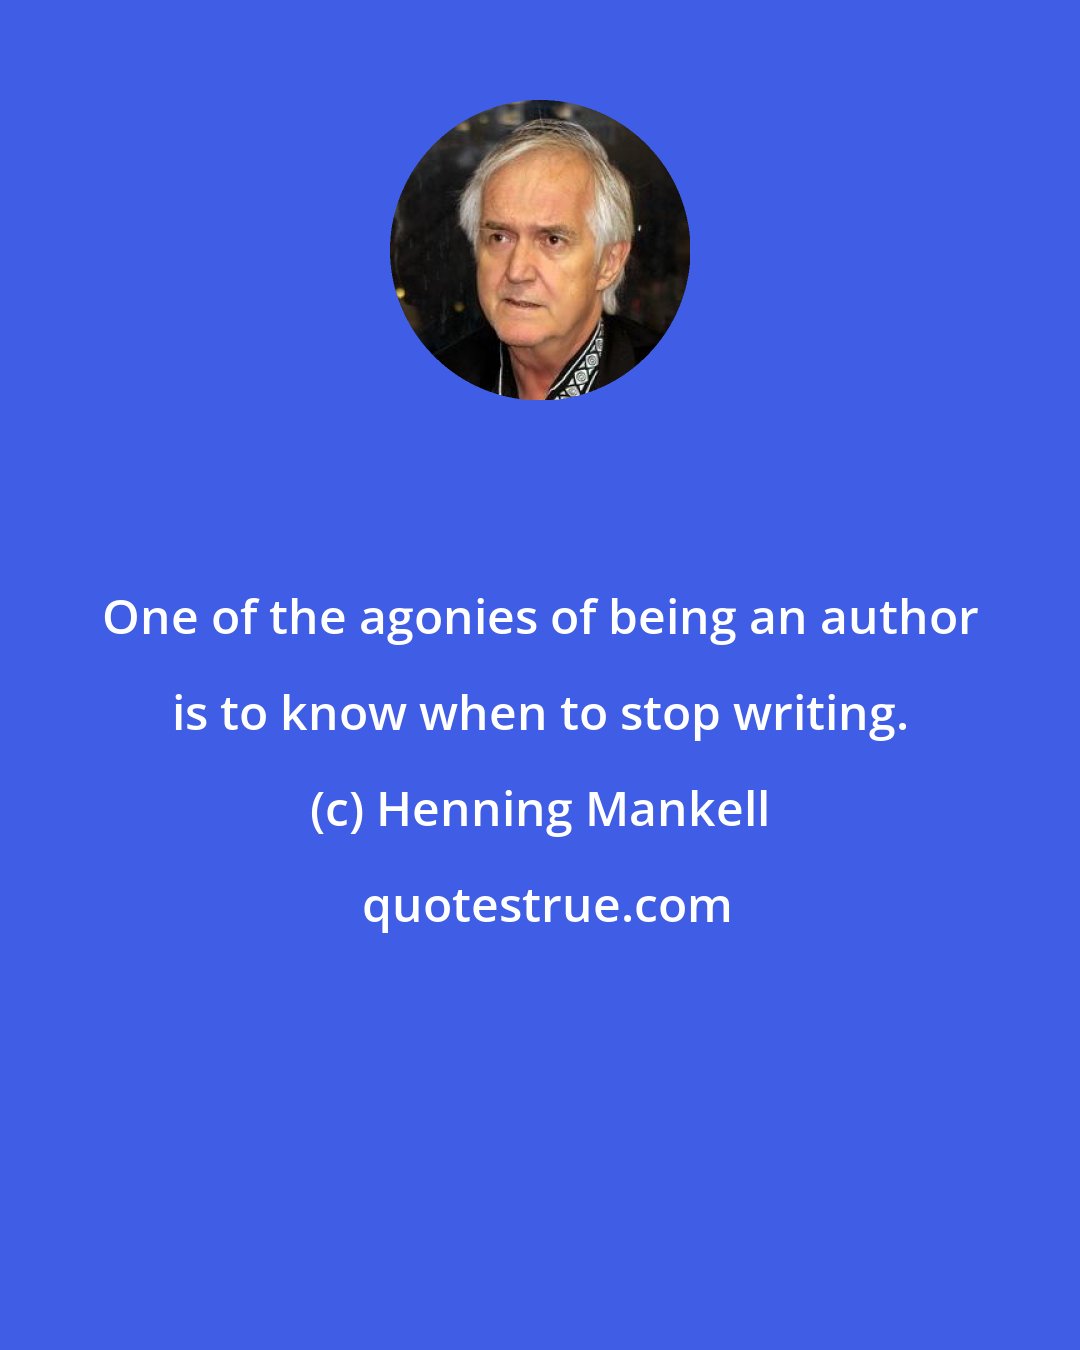 Henning Mankell: One of the agonies of being an author is to know when to stop writing.